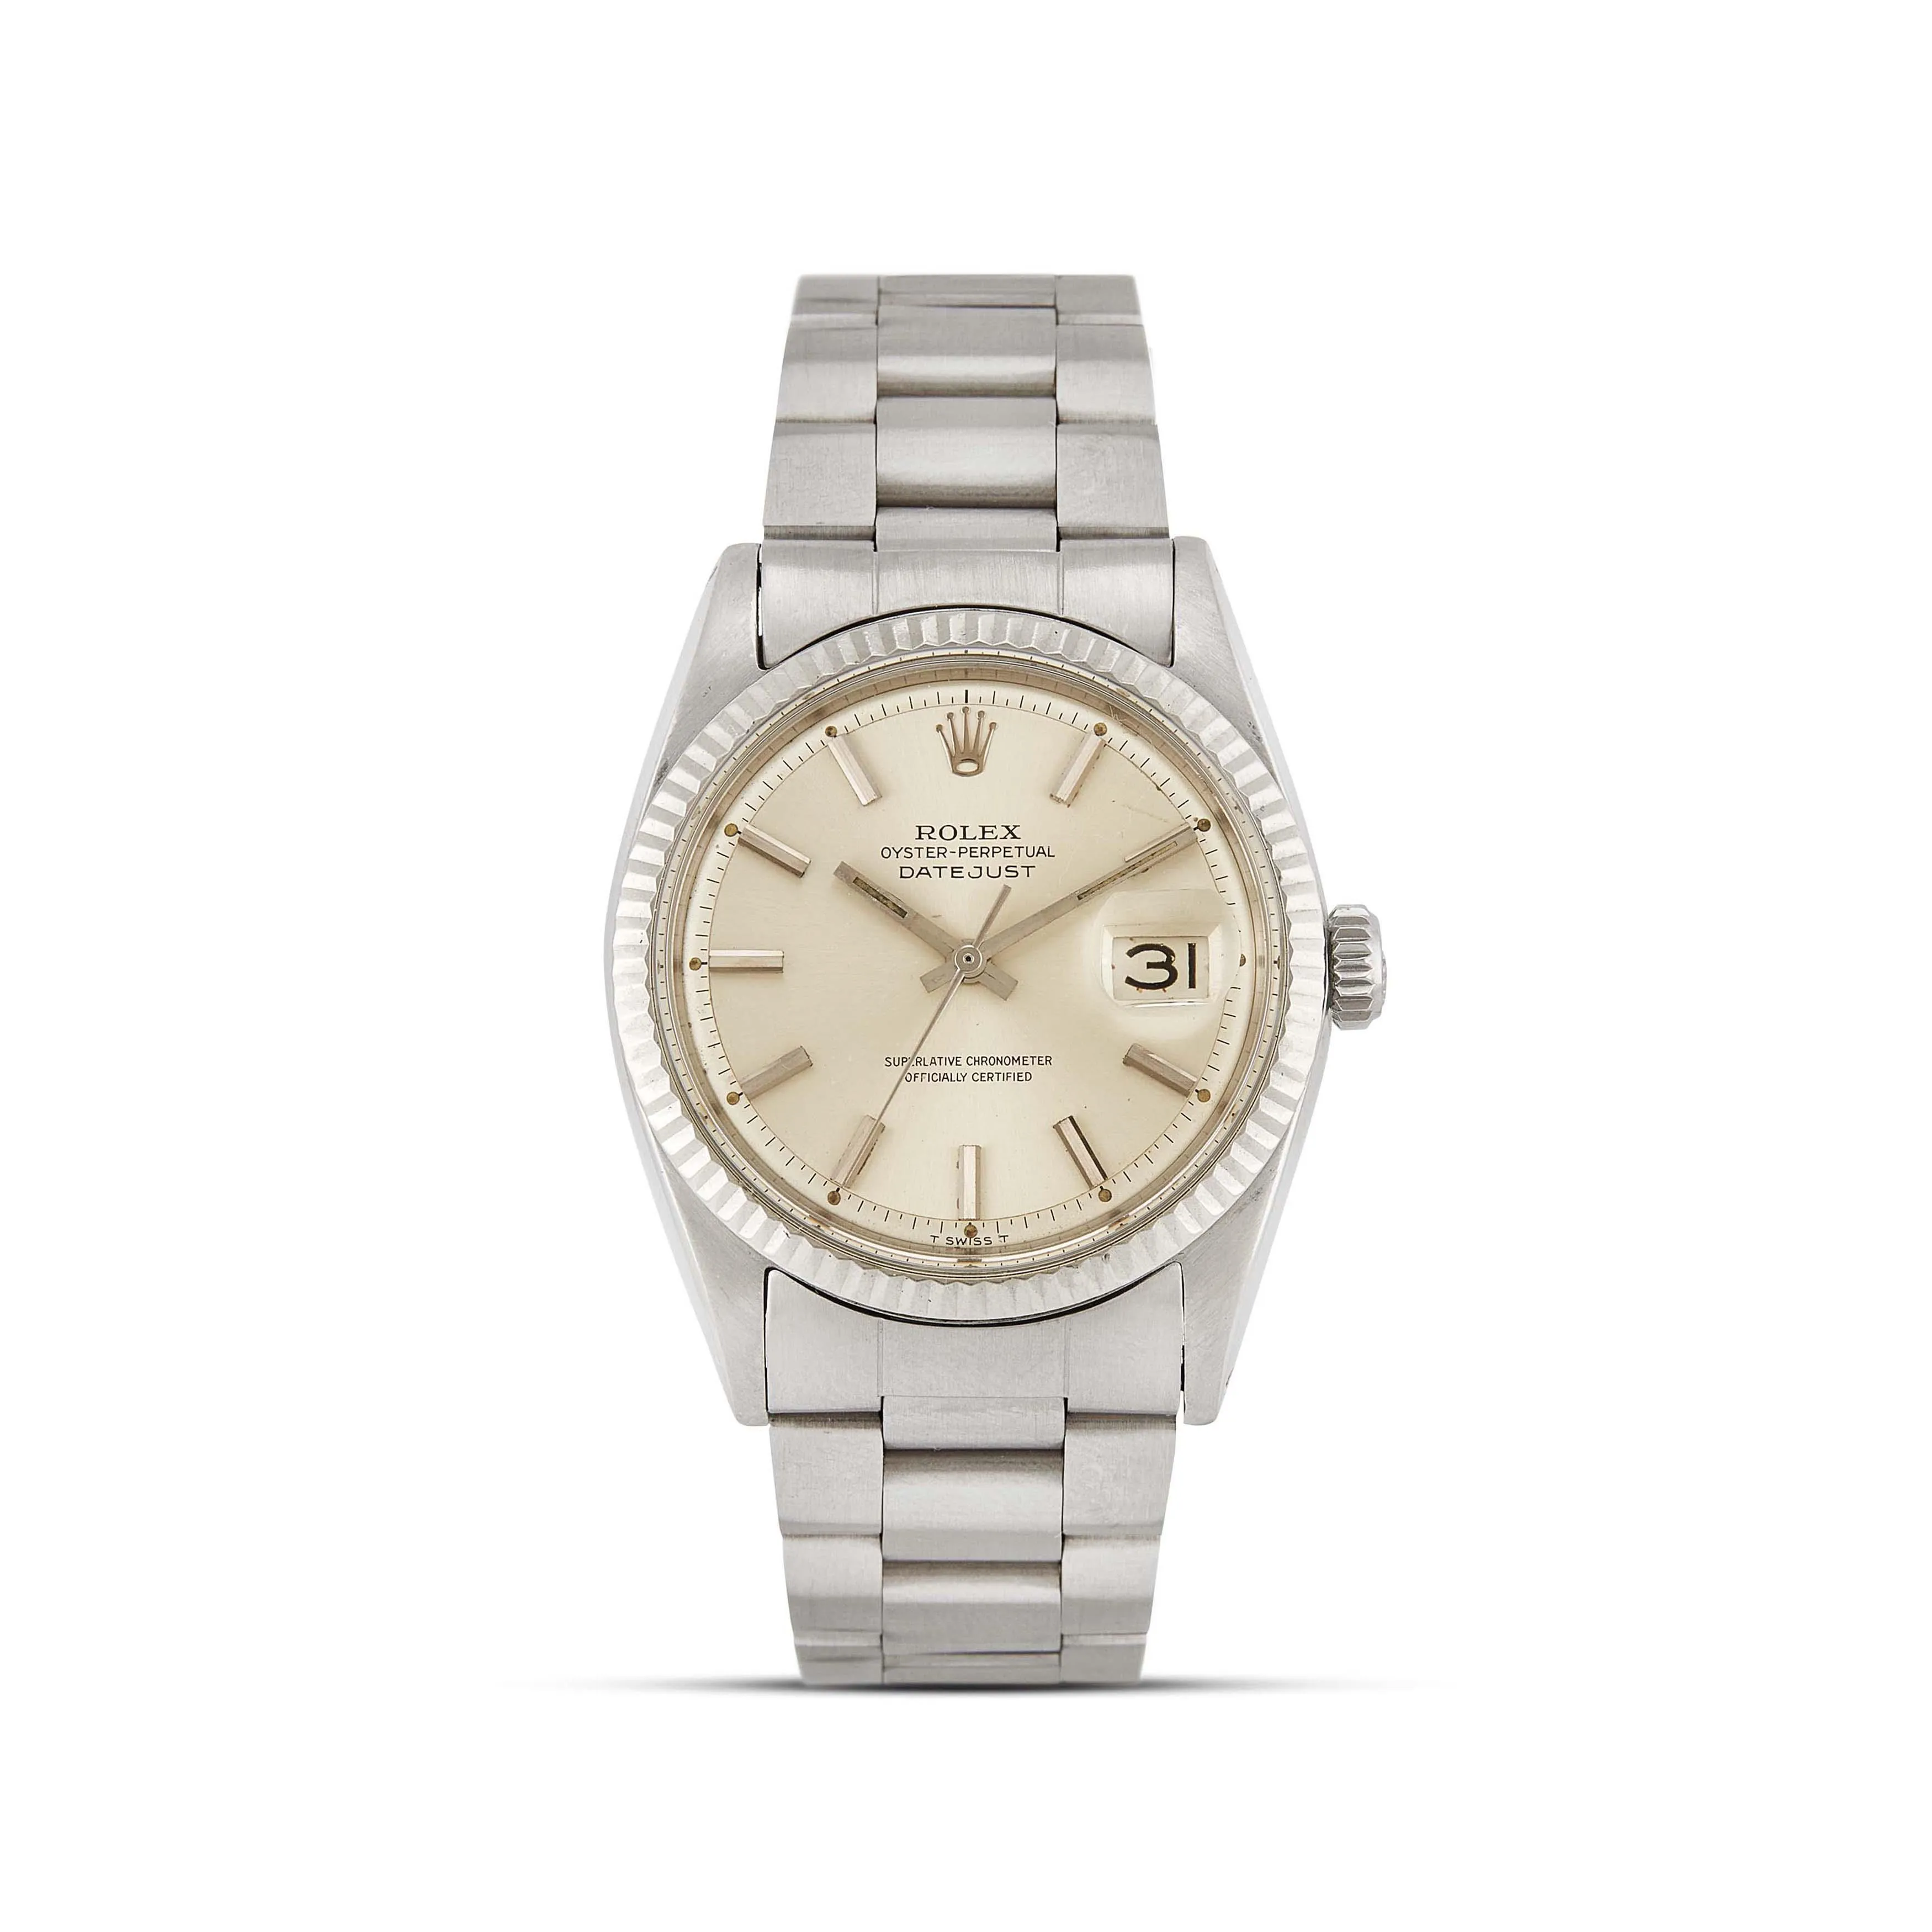 Rolex Datejust 36 1601 36mm Stainless steel Silver